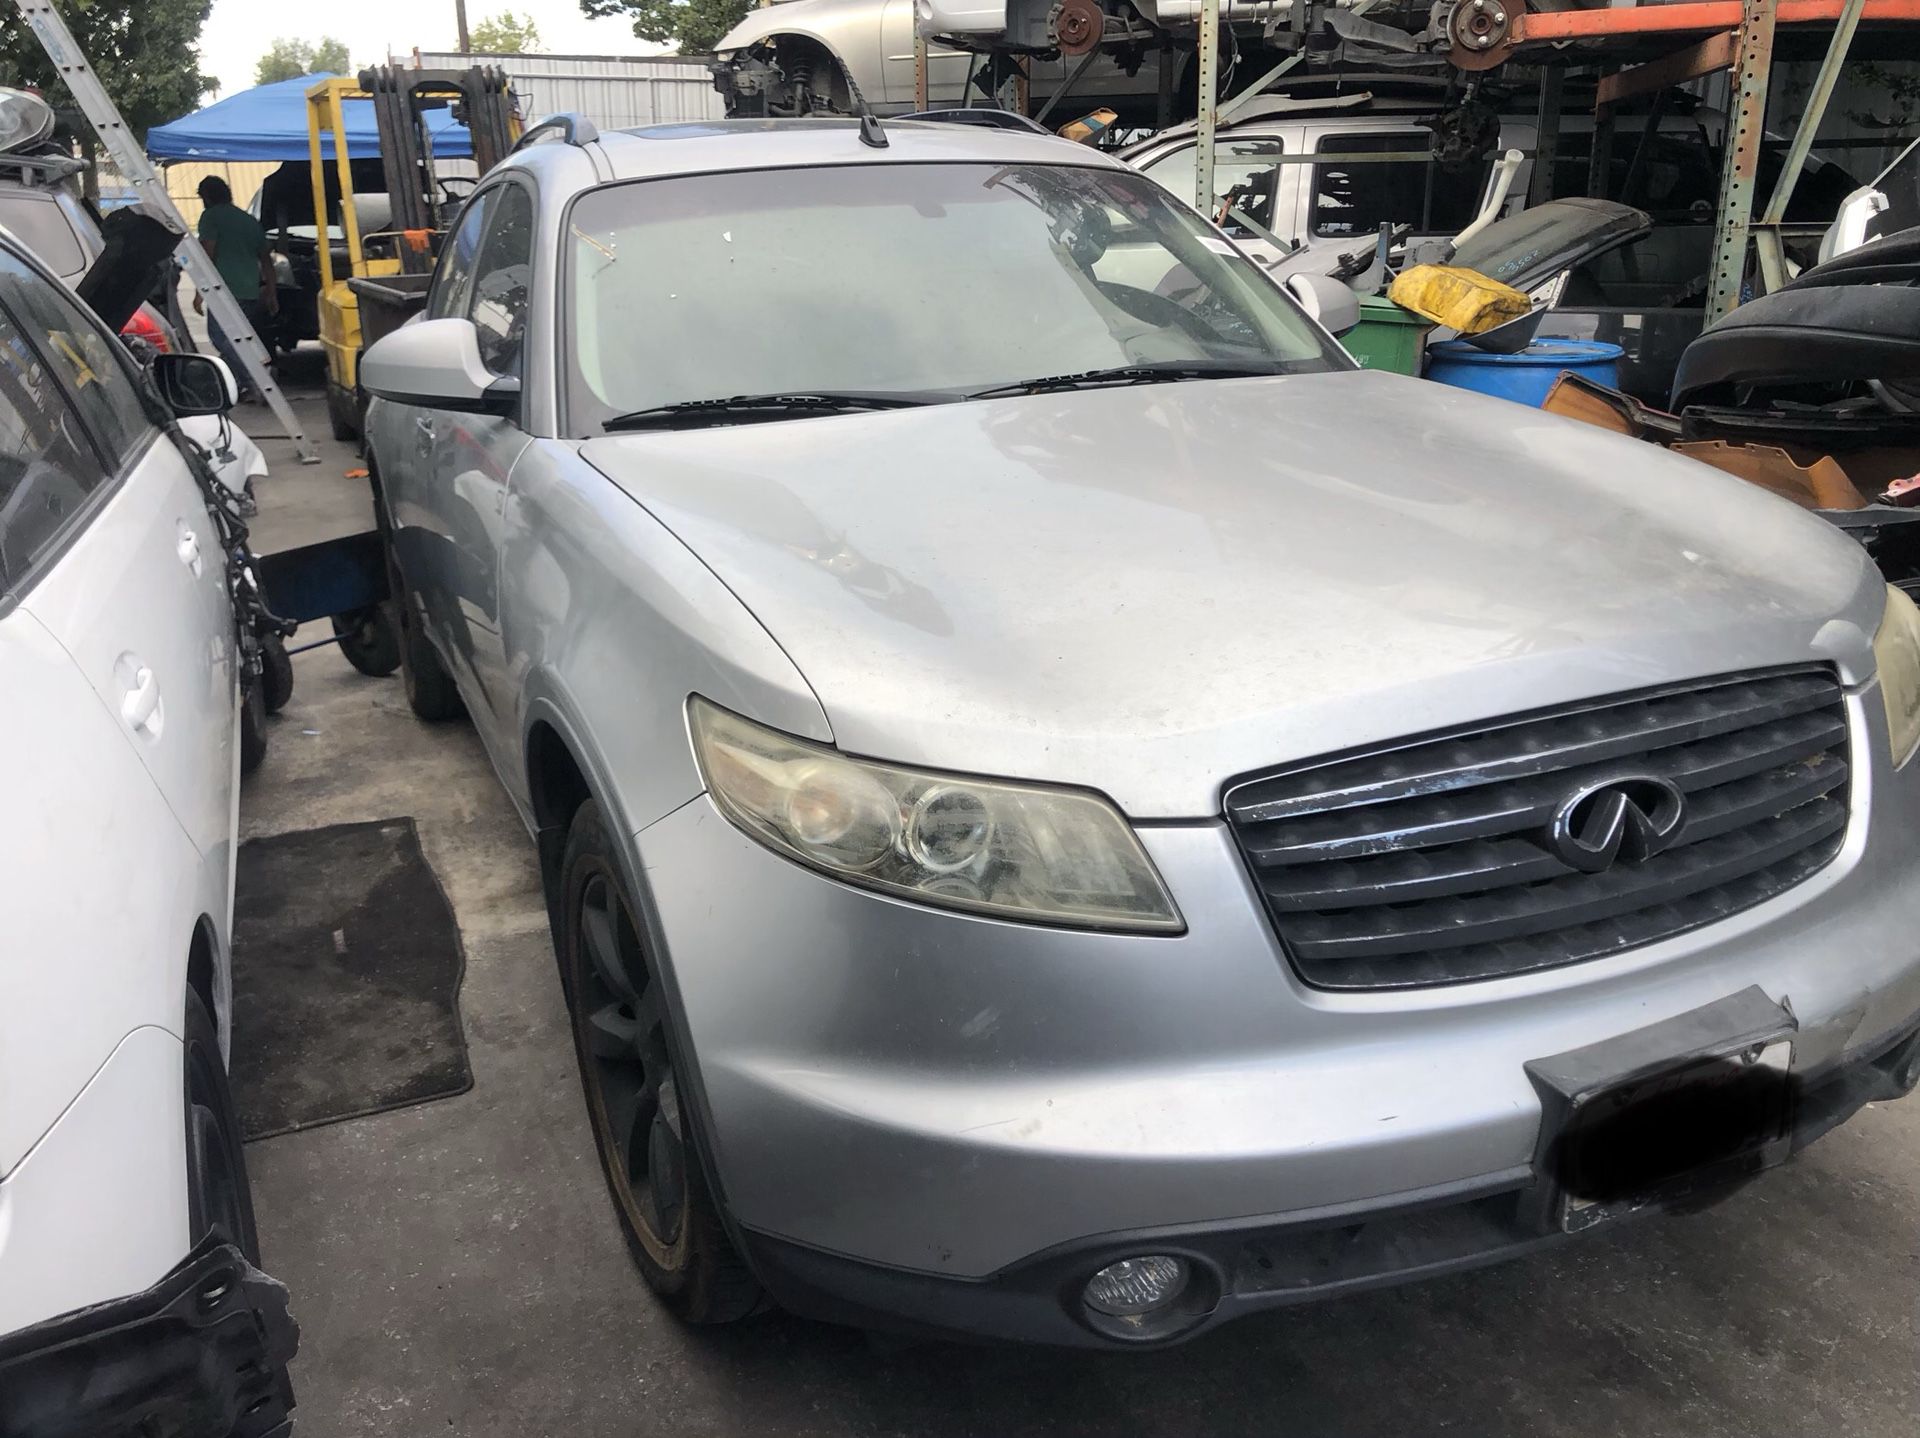 2003 Infiniti fx35 parting out.